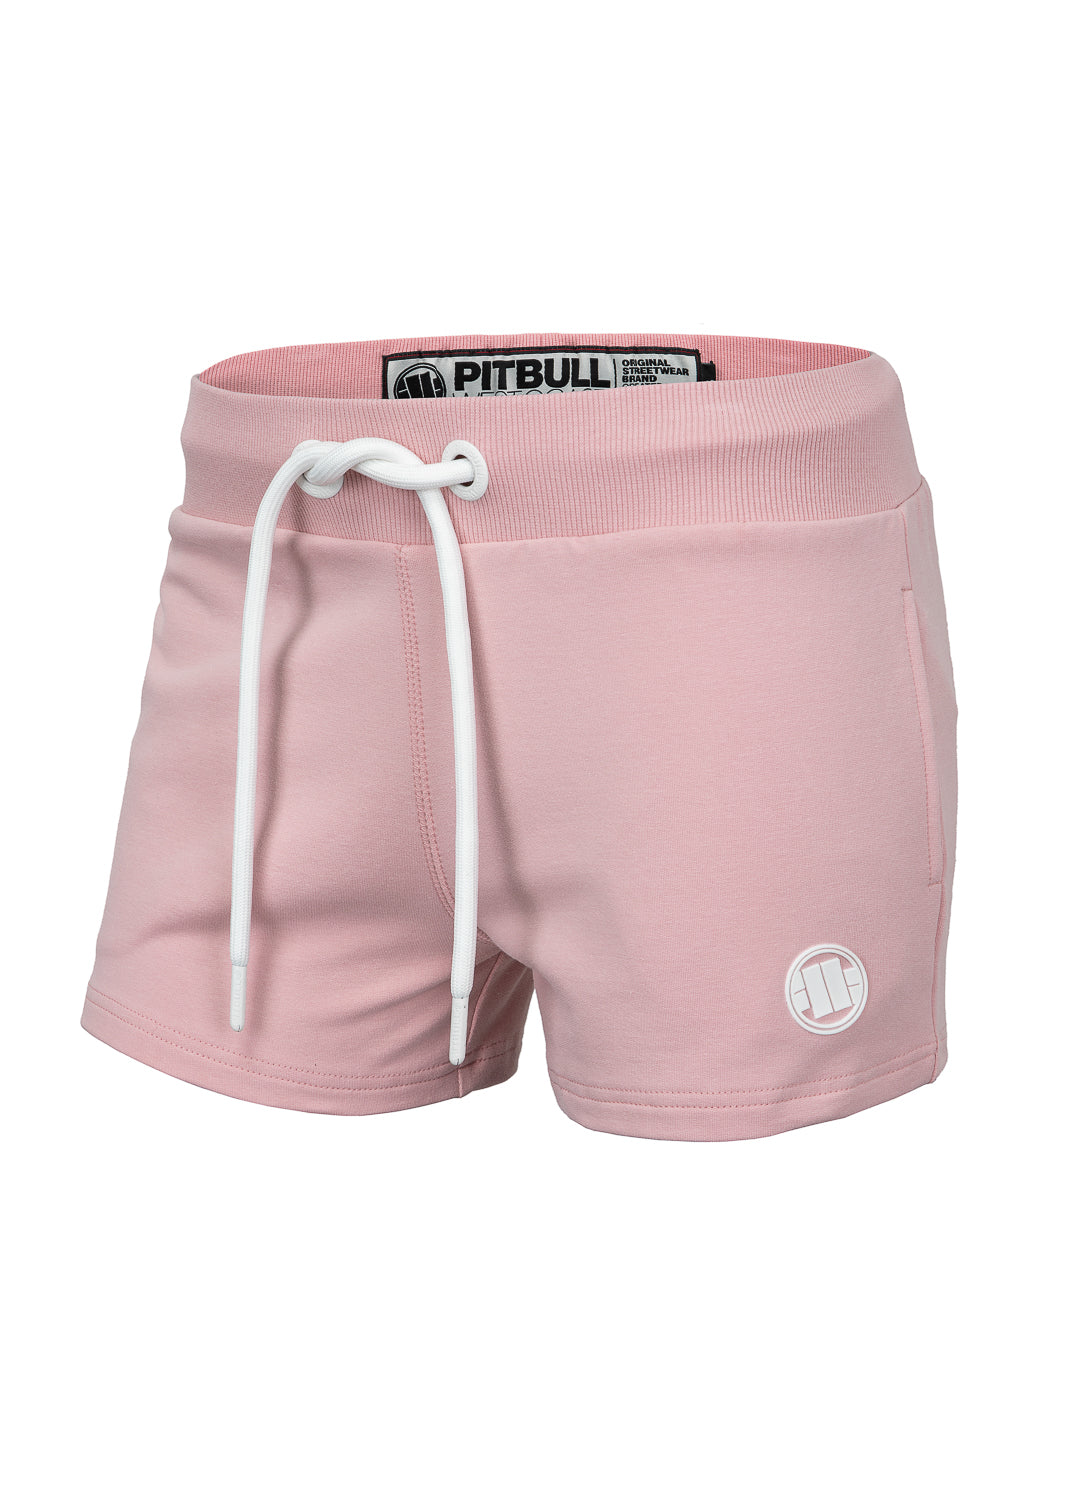 MARIPOSA French Terry Pink Shorts.